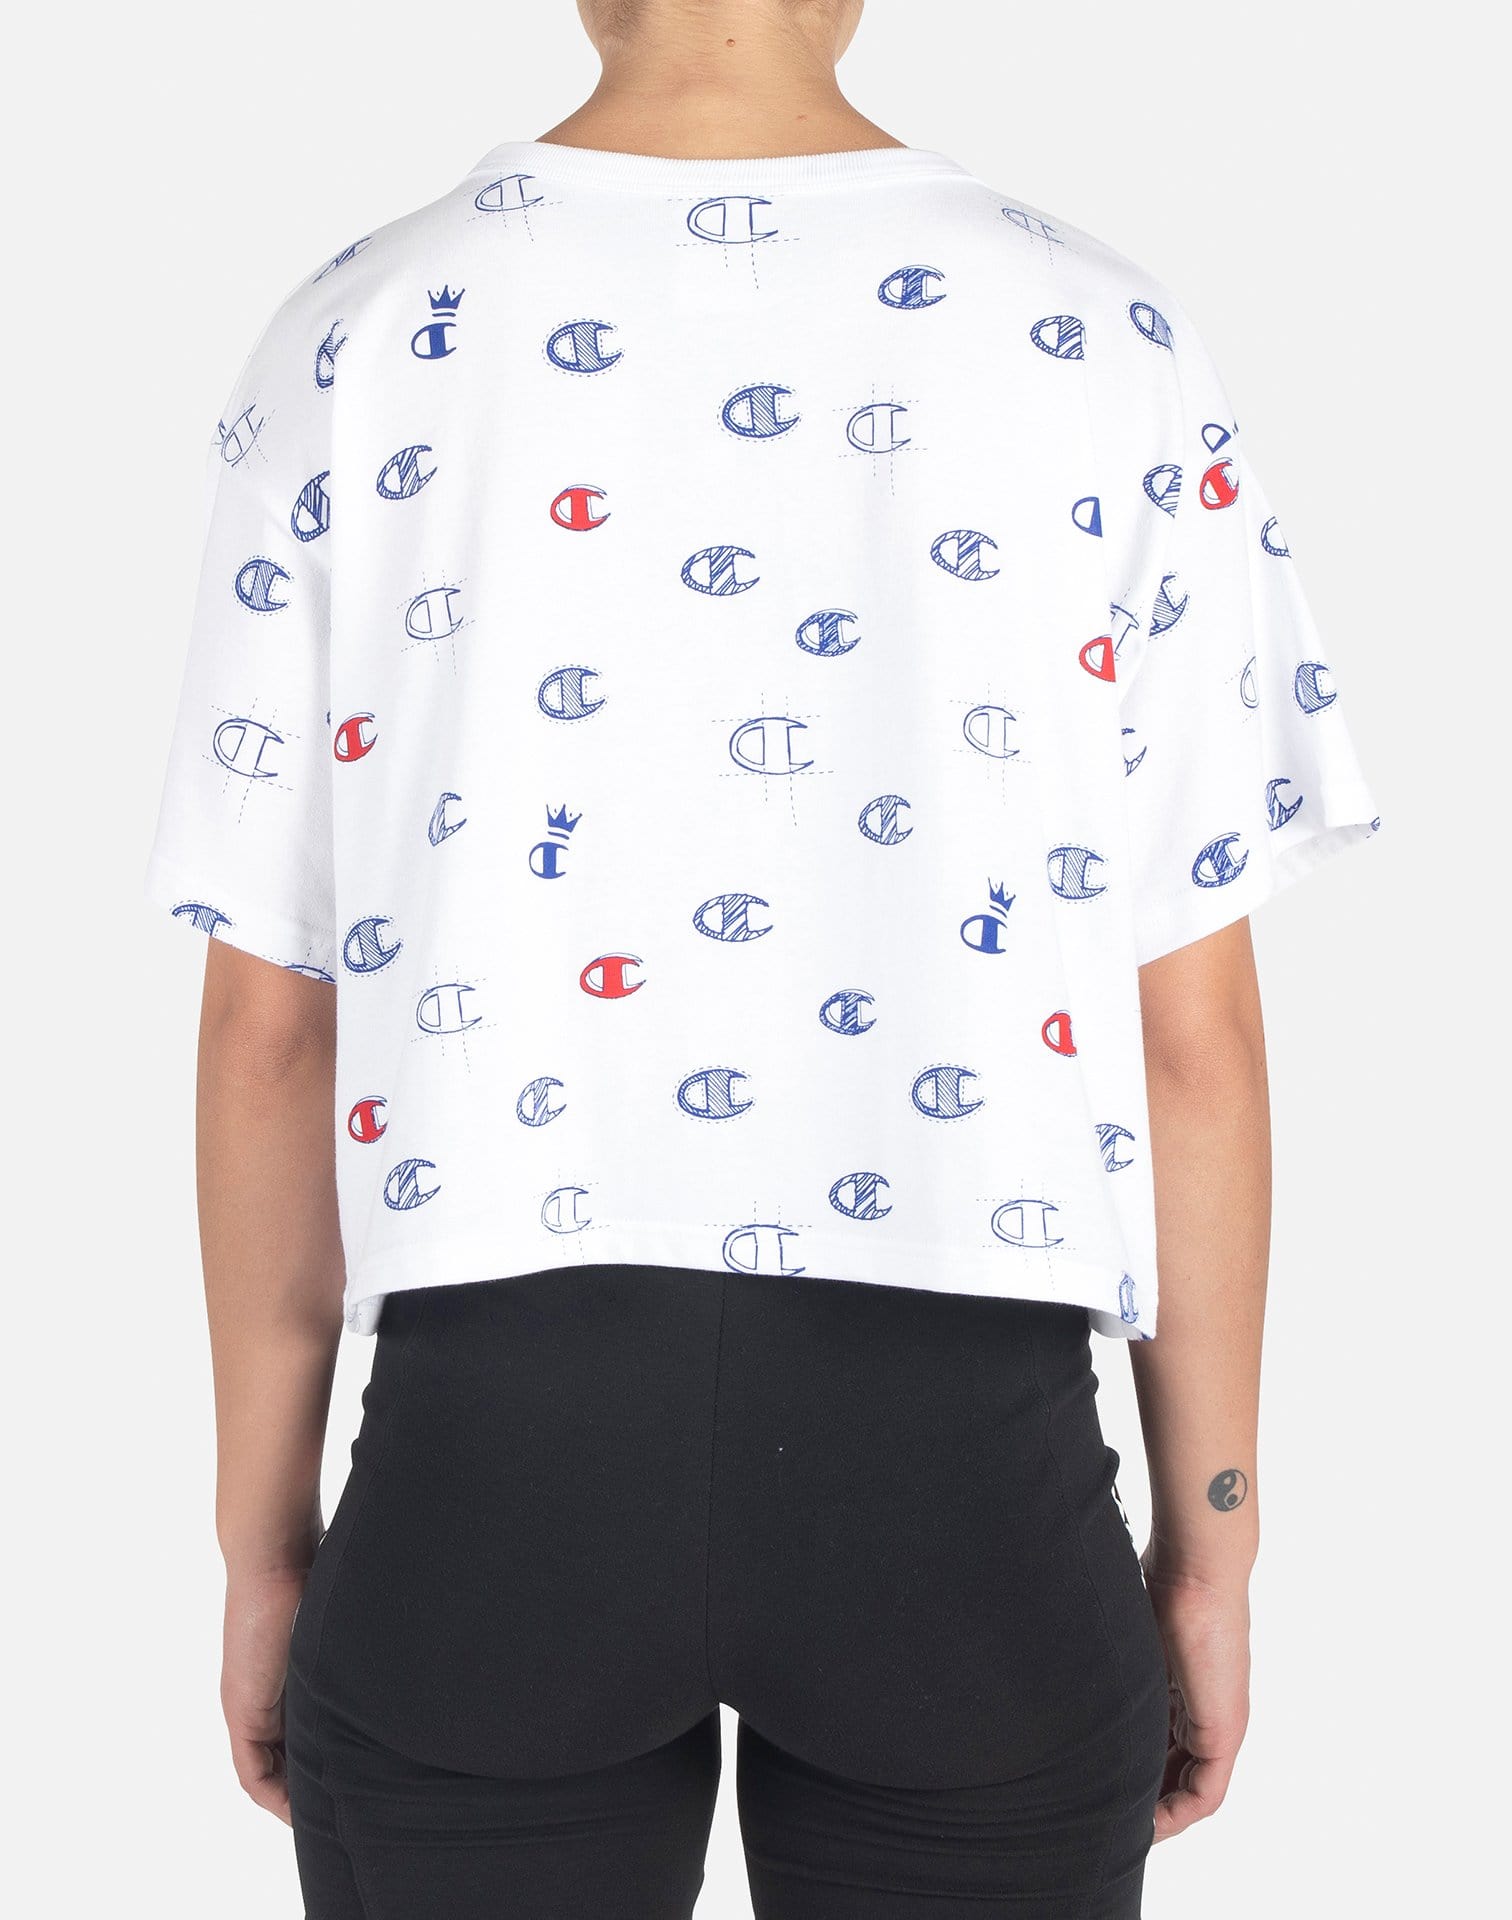 Champion Women's All-Over Printed Logo Crop Top